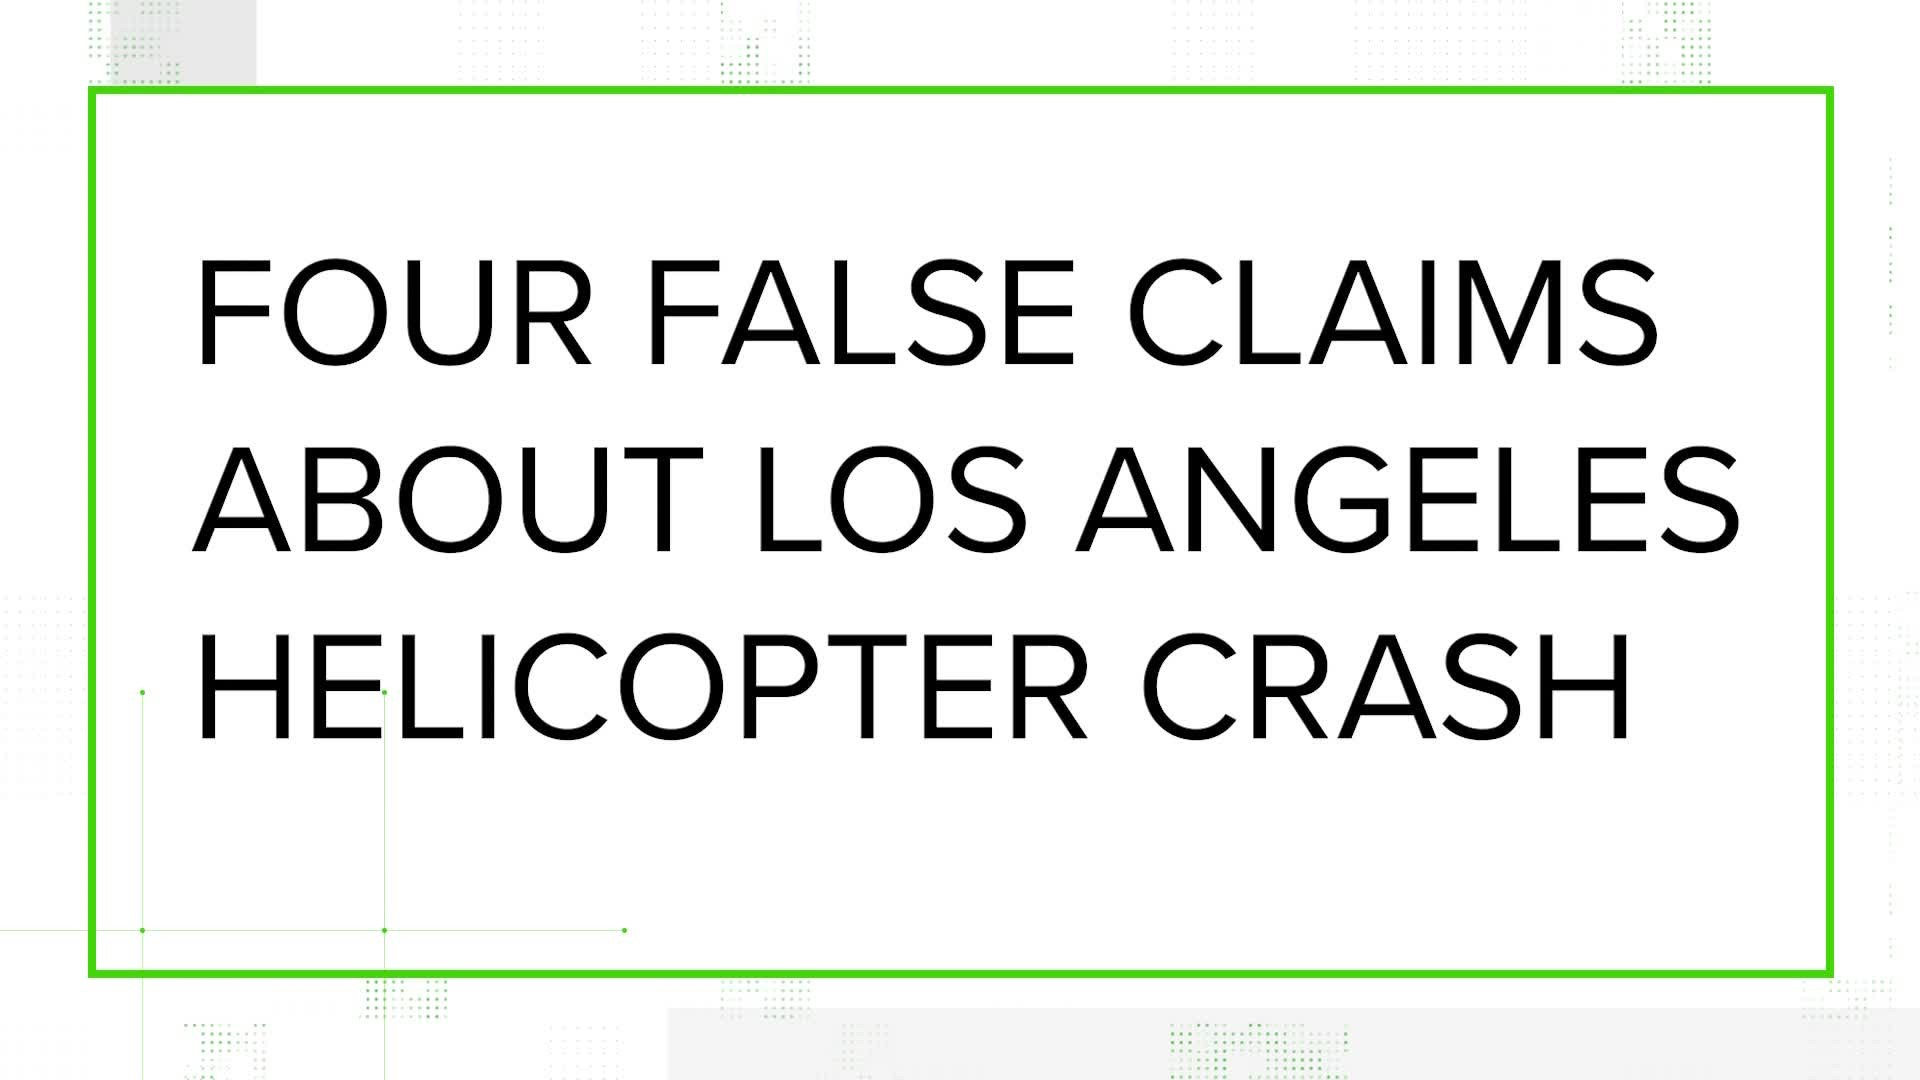 Be careful what you share! Rumors flew after the helicopter crash that killed NBA superstar Kobe Bryant.